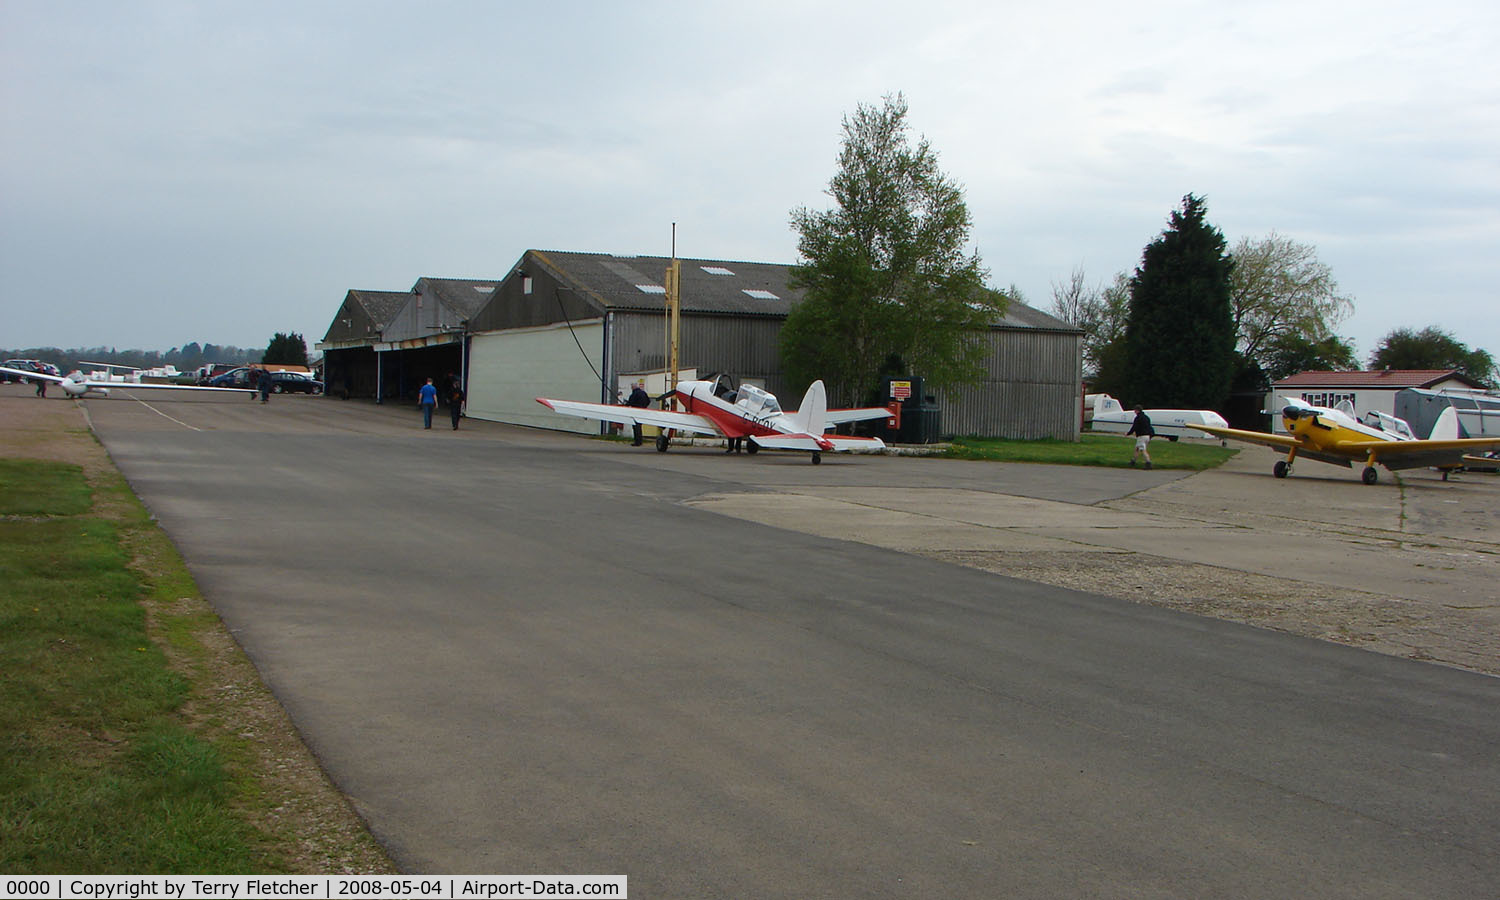 0000 Airport - Early morning at Husband Bosworths , Gliders being towed out the Hangars , Chipmunk towers getting re-fueled